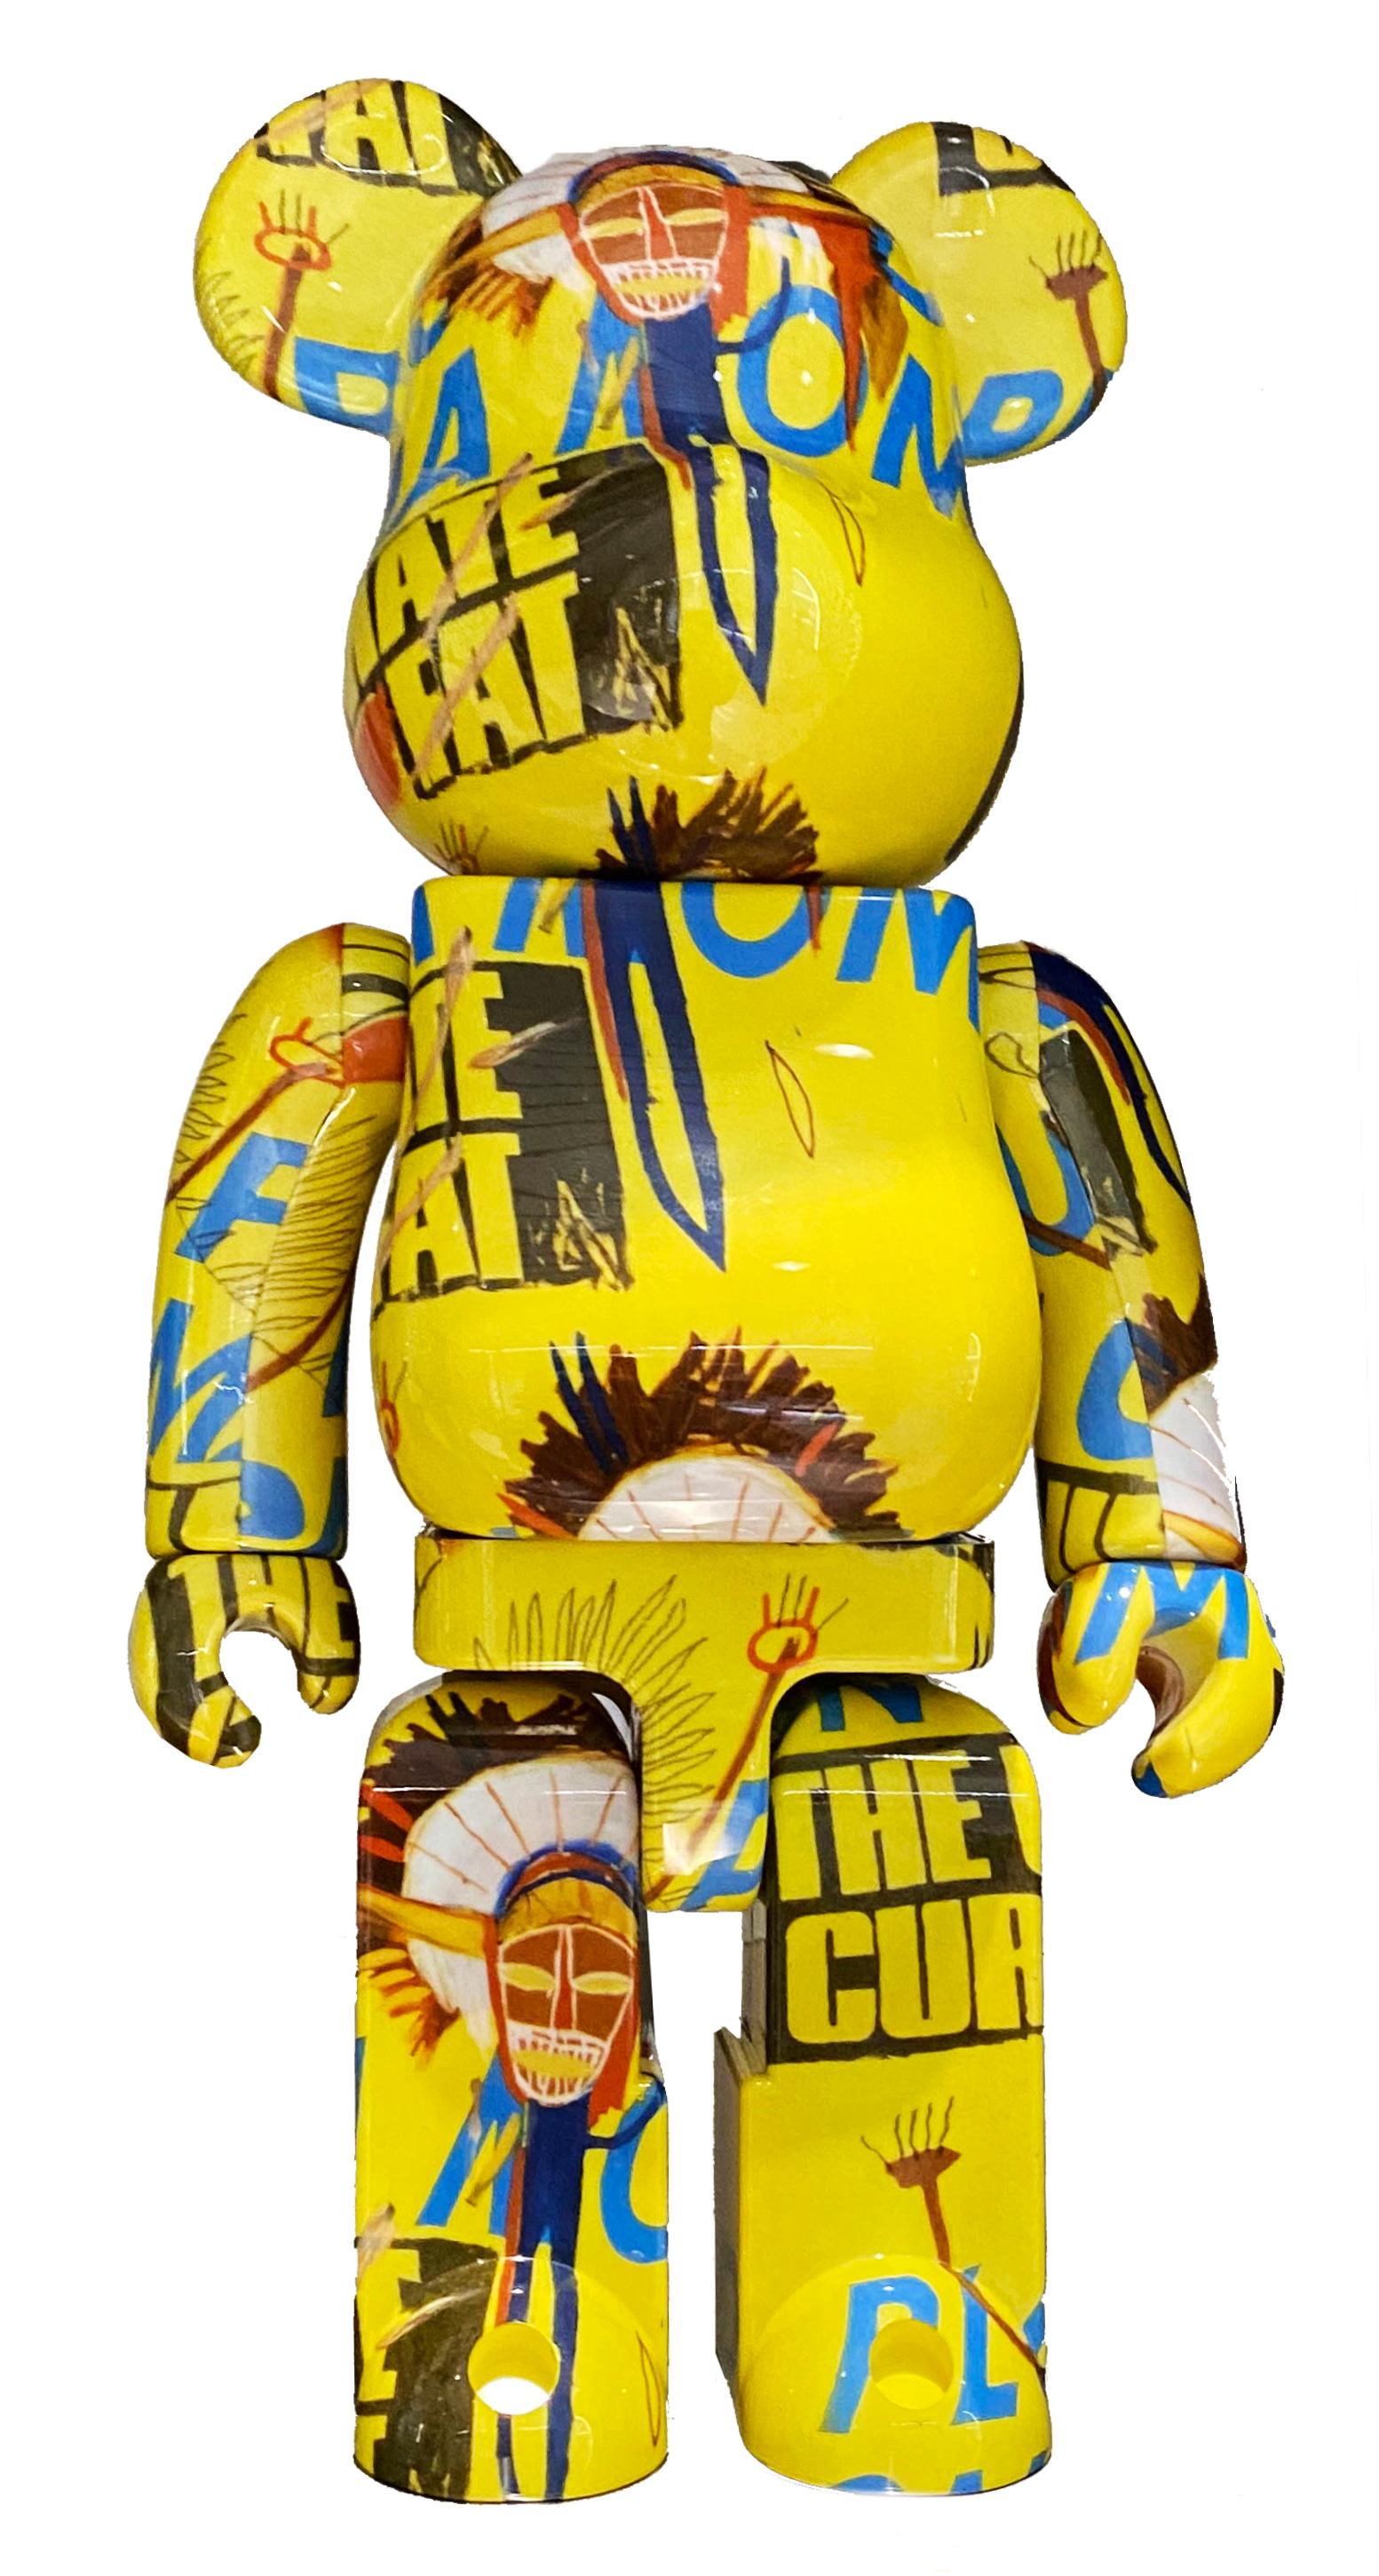 Bearbrick x Andy Warhol and Jean-Michel Basquiat Founadtions 400% Vinyl Figures: Set of two works: collectibles trademarked & licensed by the Estate of Jean-Michel Basquiat & Andy Warhol, respectively. The partnered collectibles reveals details from